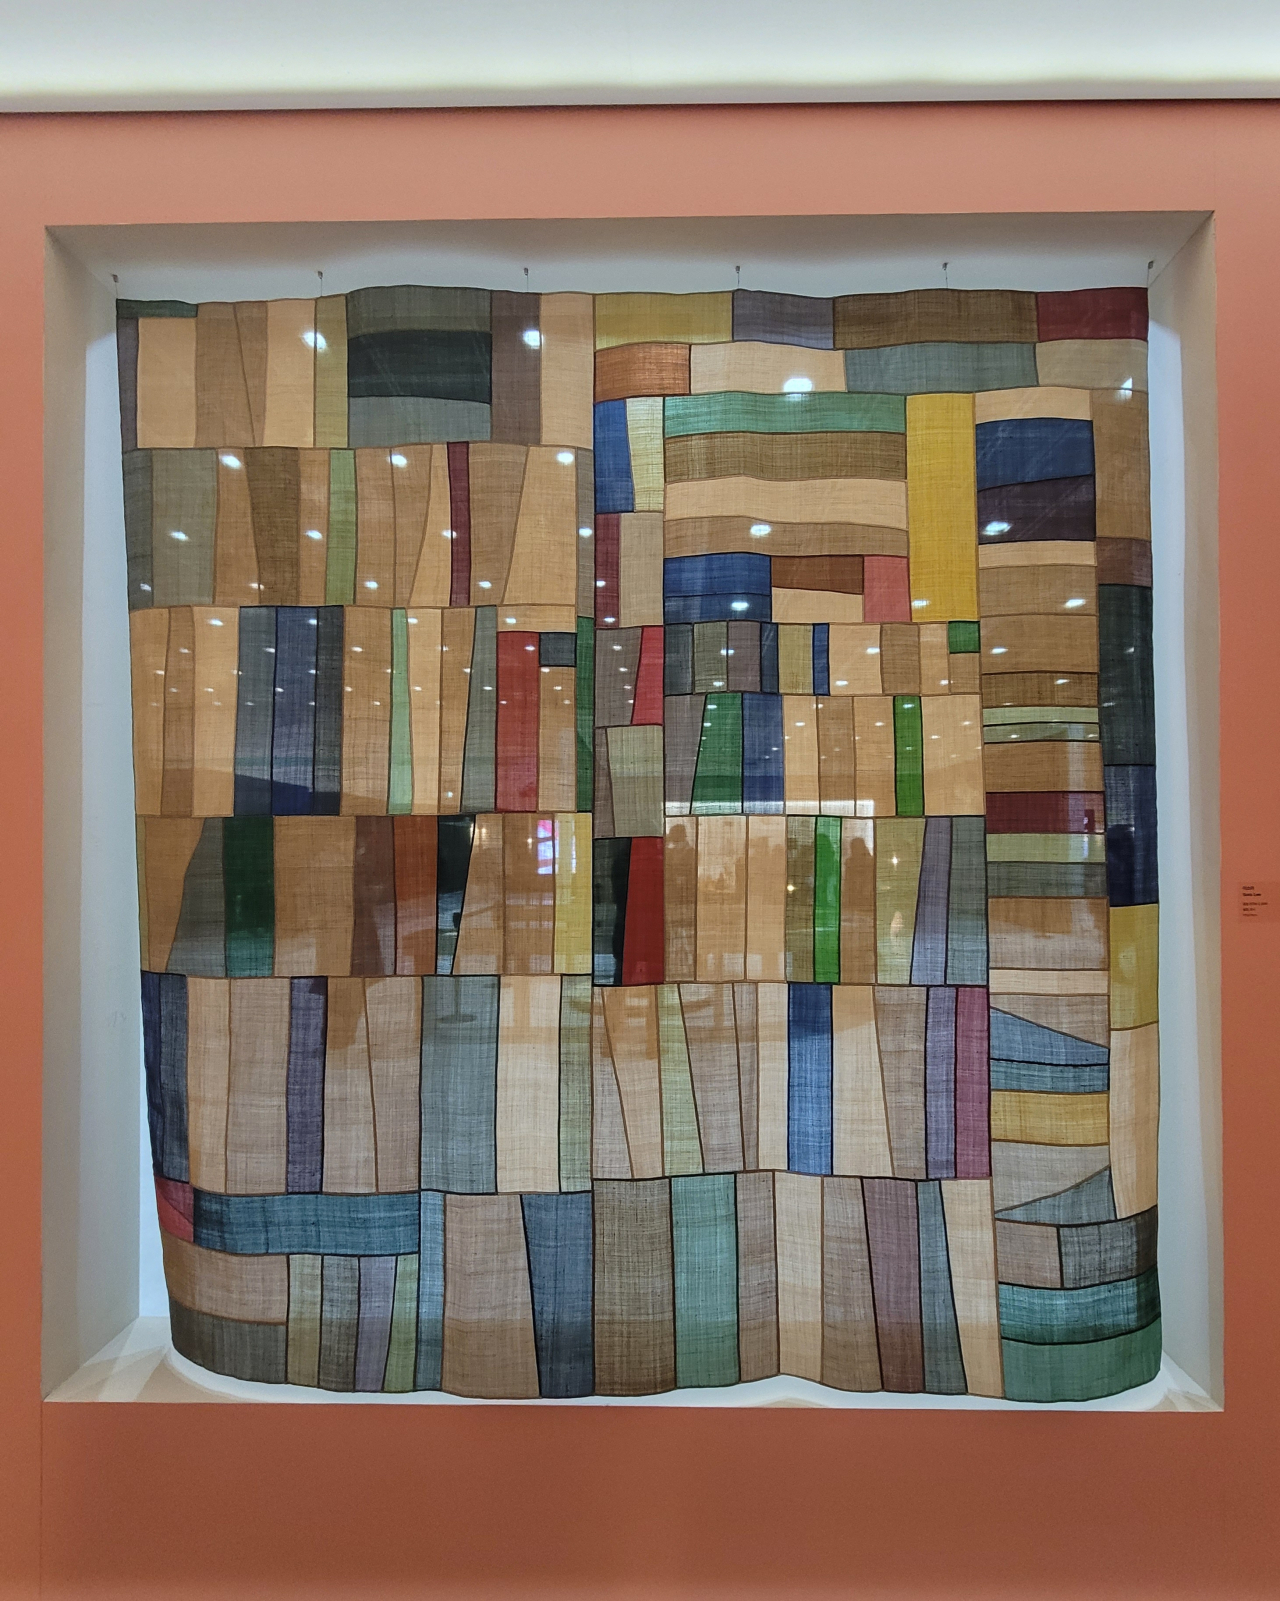 “Ottchil Jogakbo (Patchwork Wrapping Cloth) 2” by Lee So-ra (Park Yuna/The Korea Herald)